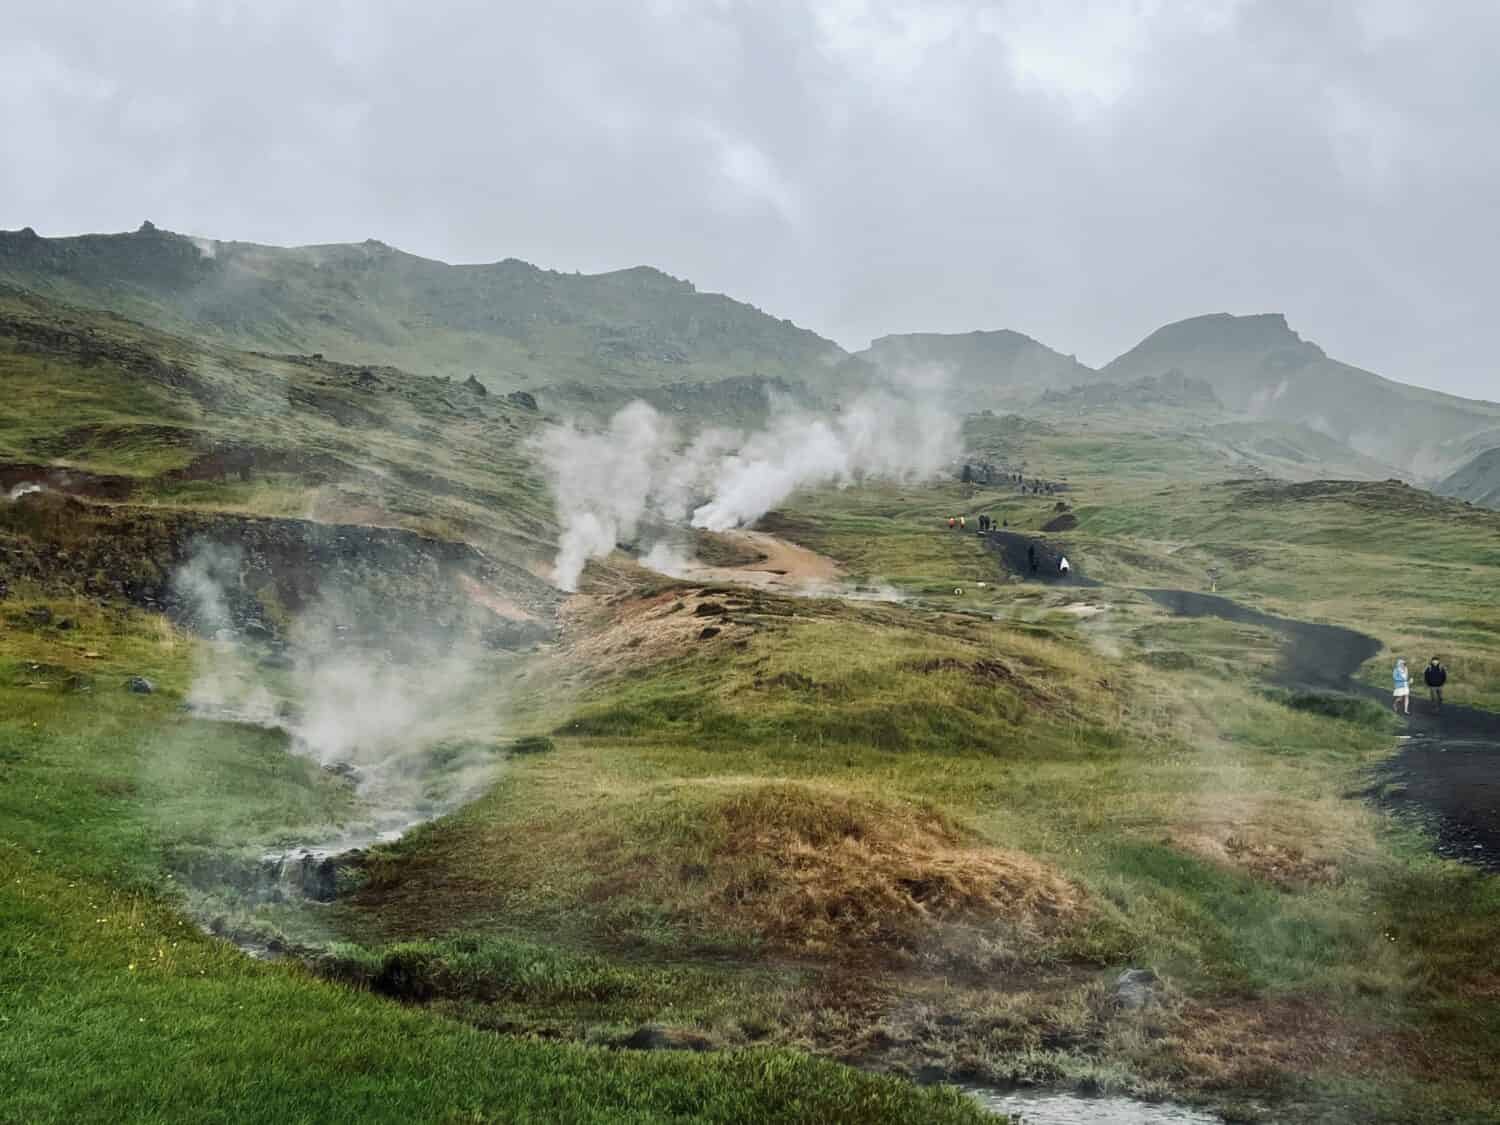 Mossy and wetland terrain of Reykjadalur Valley, Iceland. Valley is known for its mudpots, soda springs and geothermal activity. August 6, 2023.